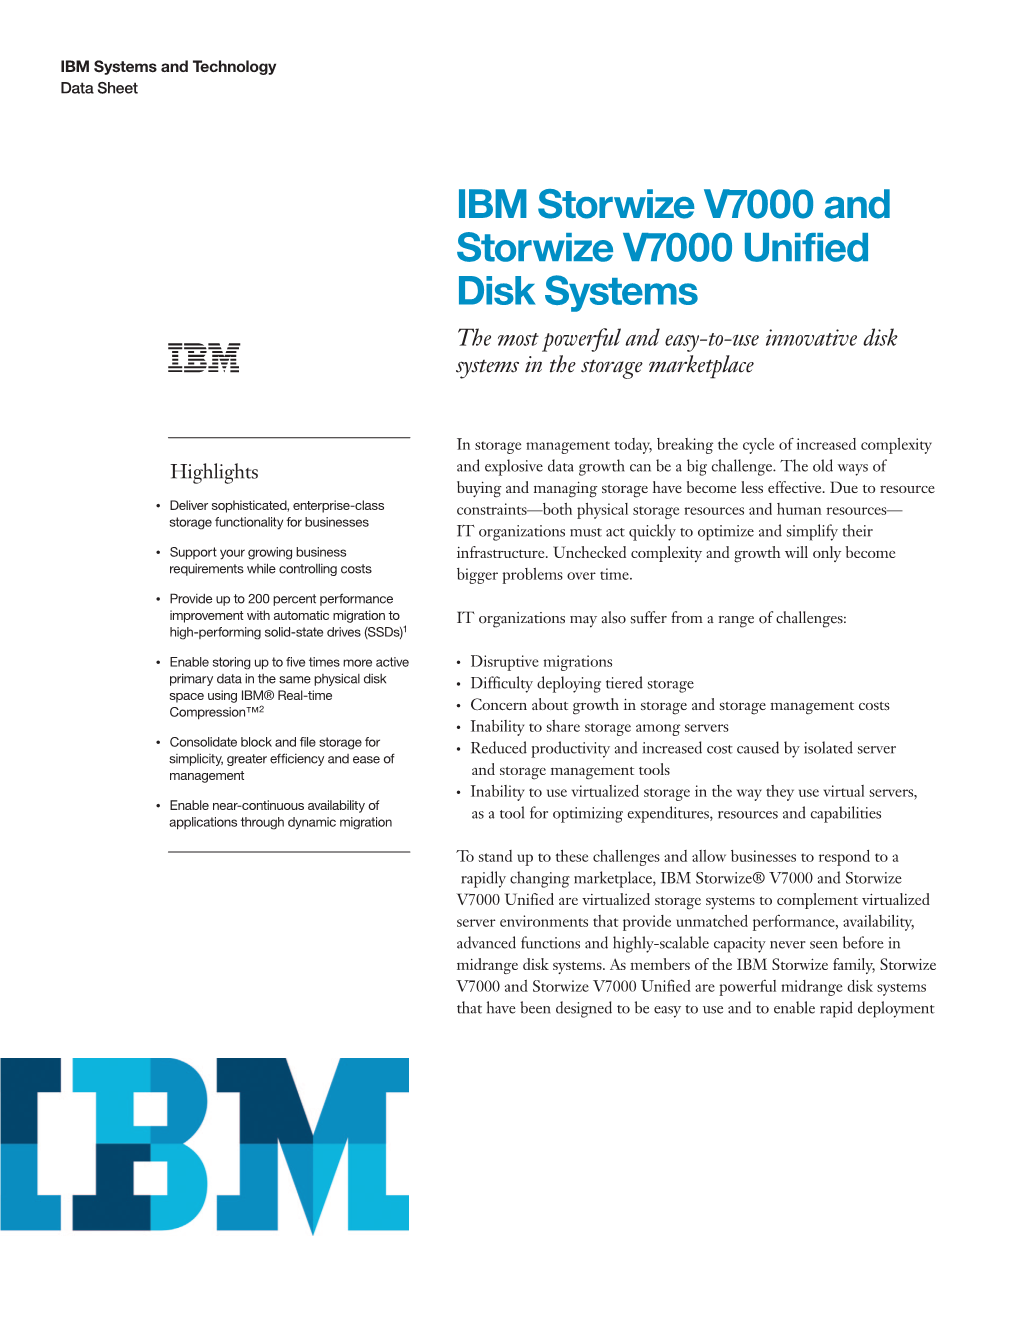 IBM Storwize V7000 and Storwize V7000 Unified Disk Systems the Most Powerful and Easy-To-Use Innovative Disk Systems in the Storage Marketplace